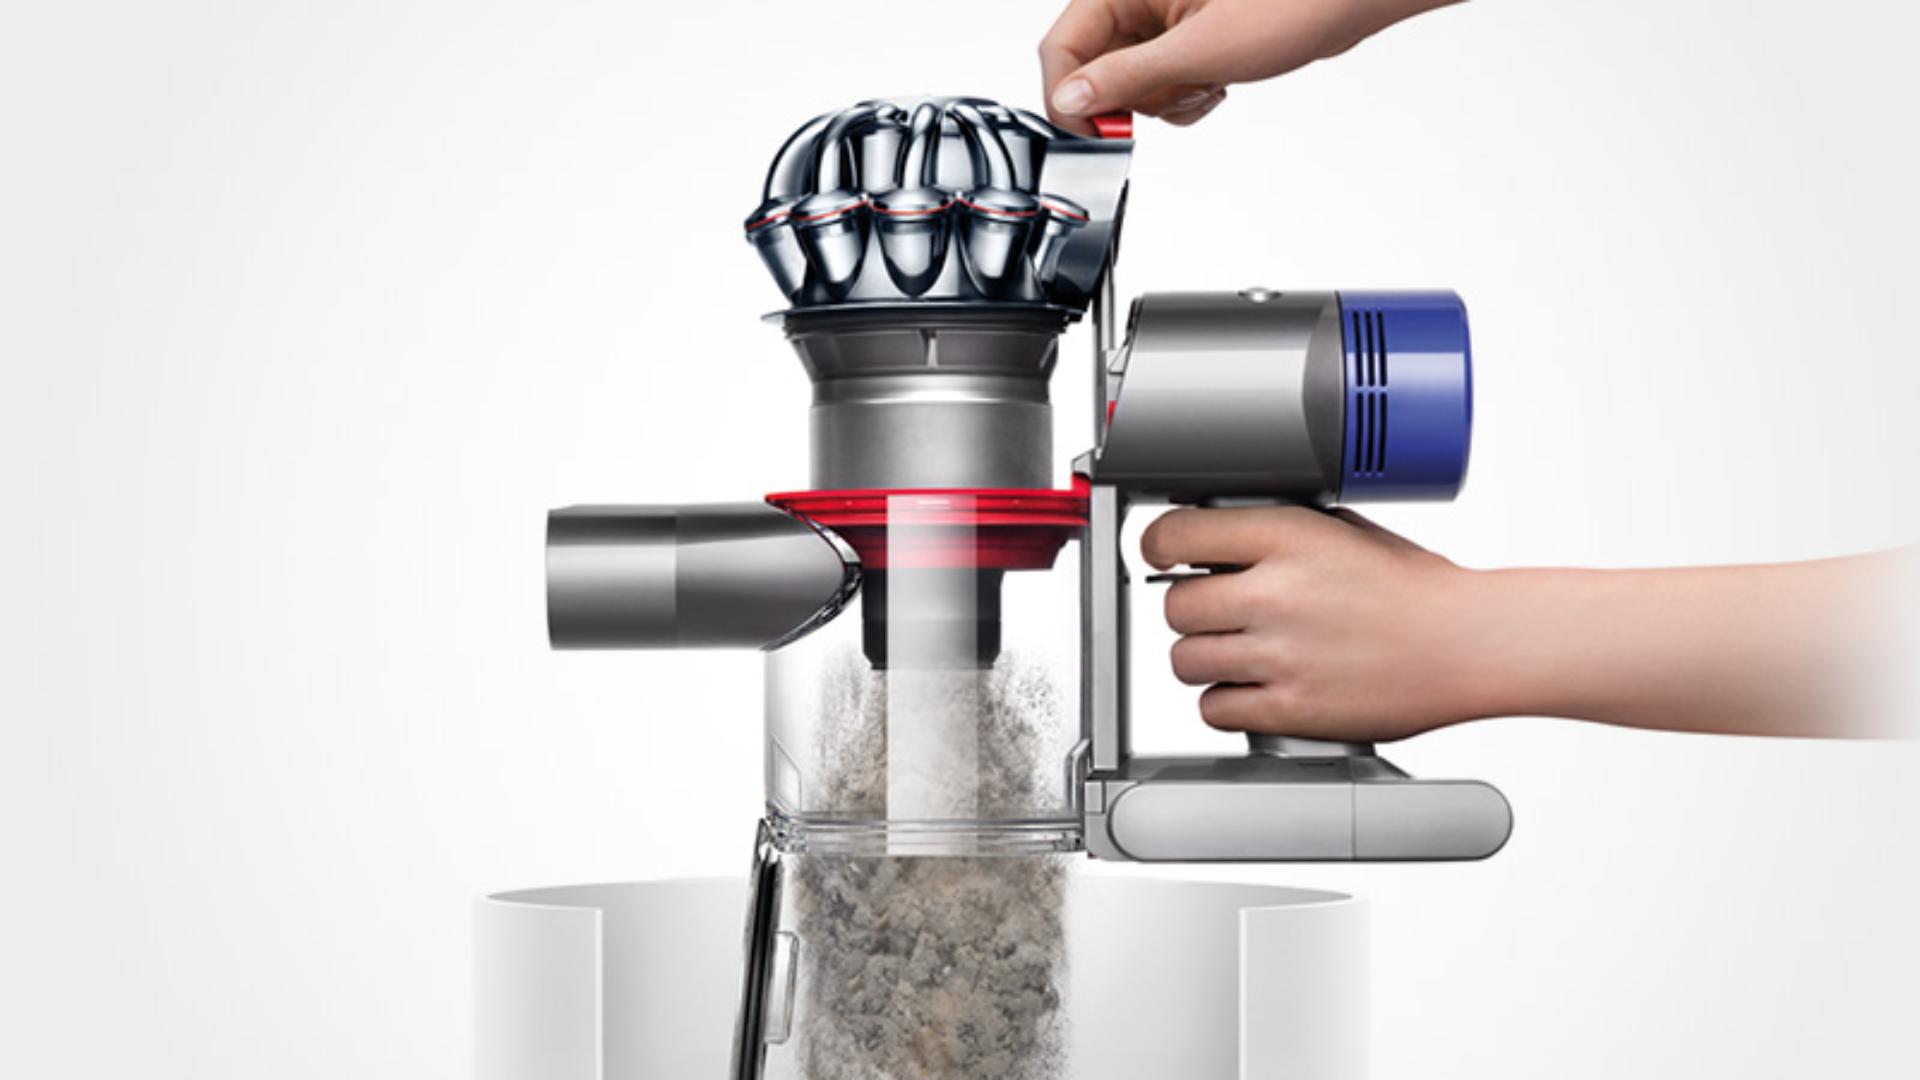 See the Dyson V8 Absolute vacuum's no-touch bin emptying mechanism.